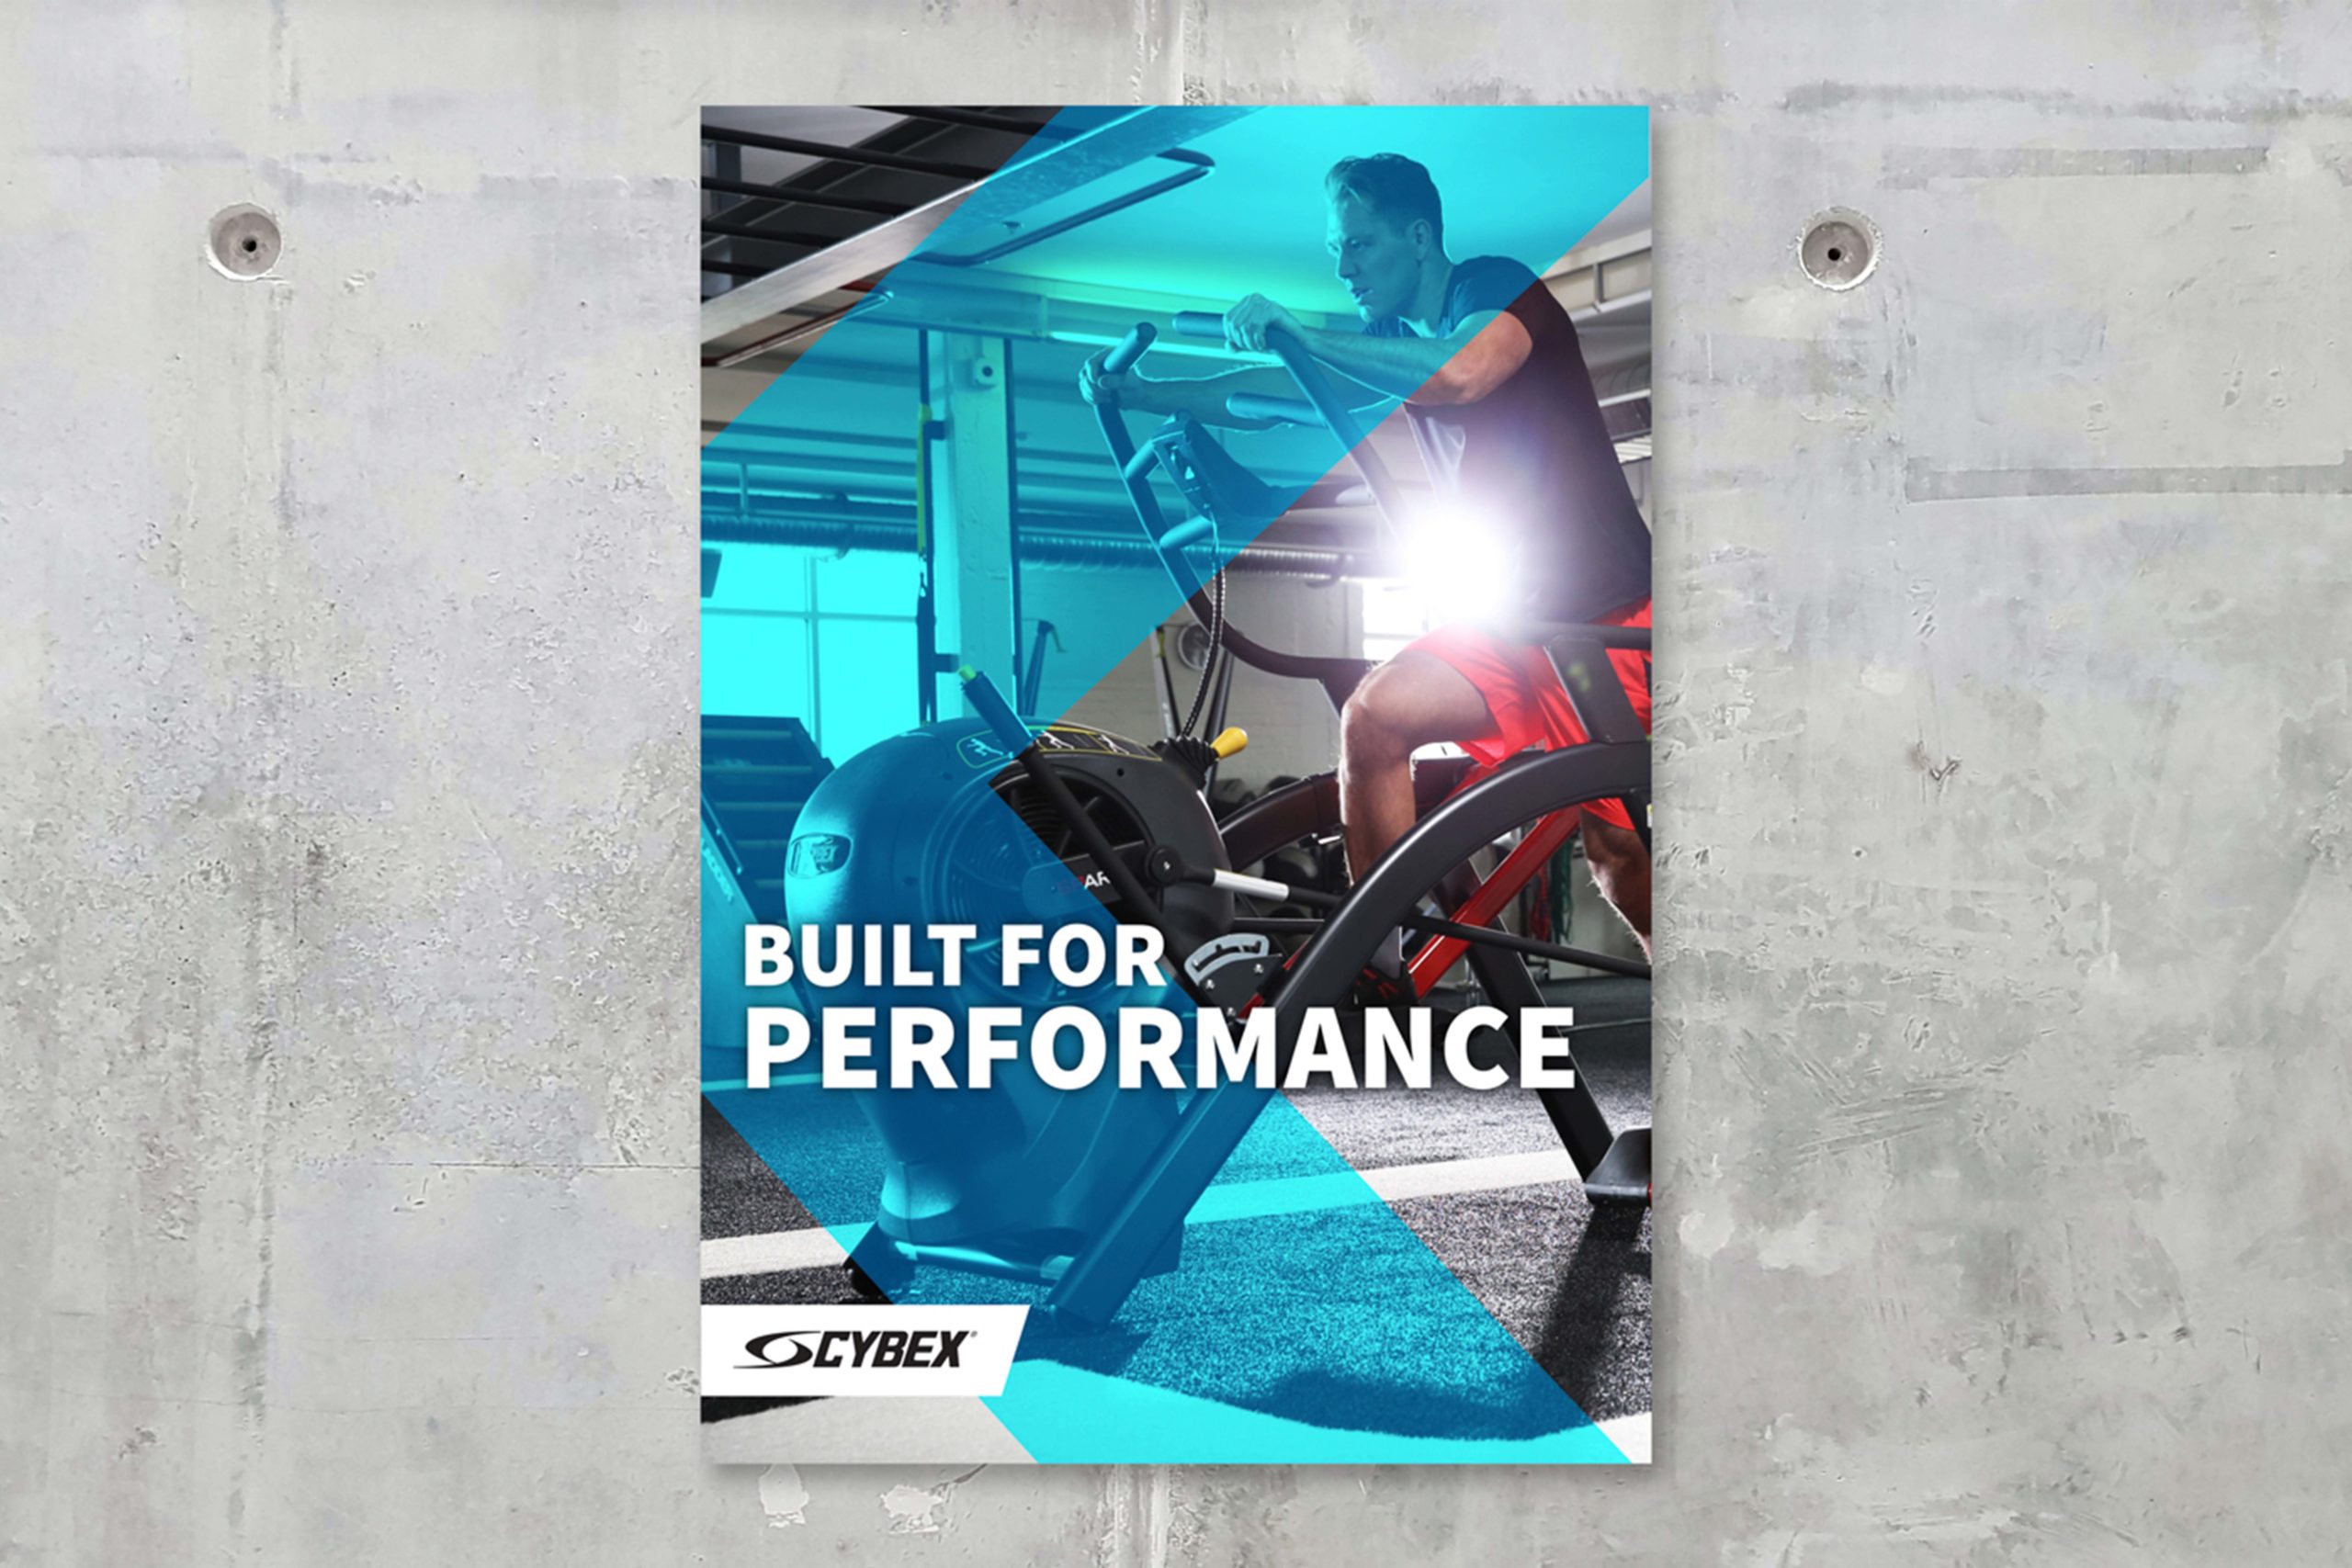 Cybex Marketing Campaing By ipulse Build For Performance Poster Design